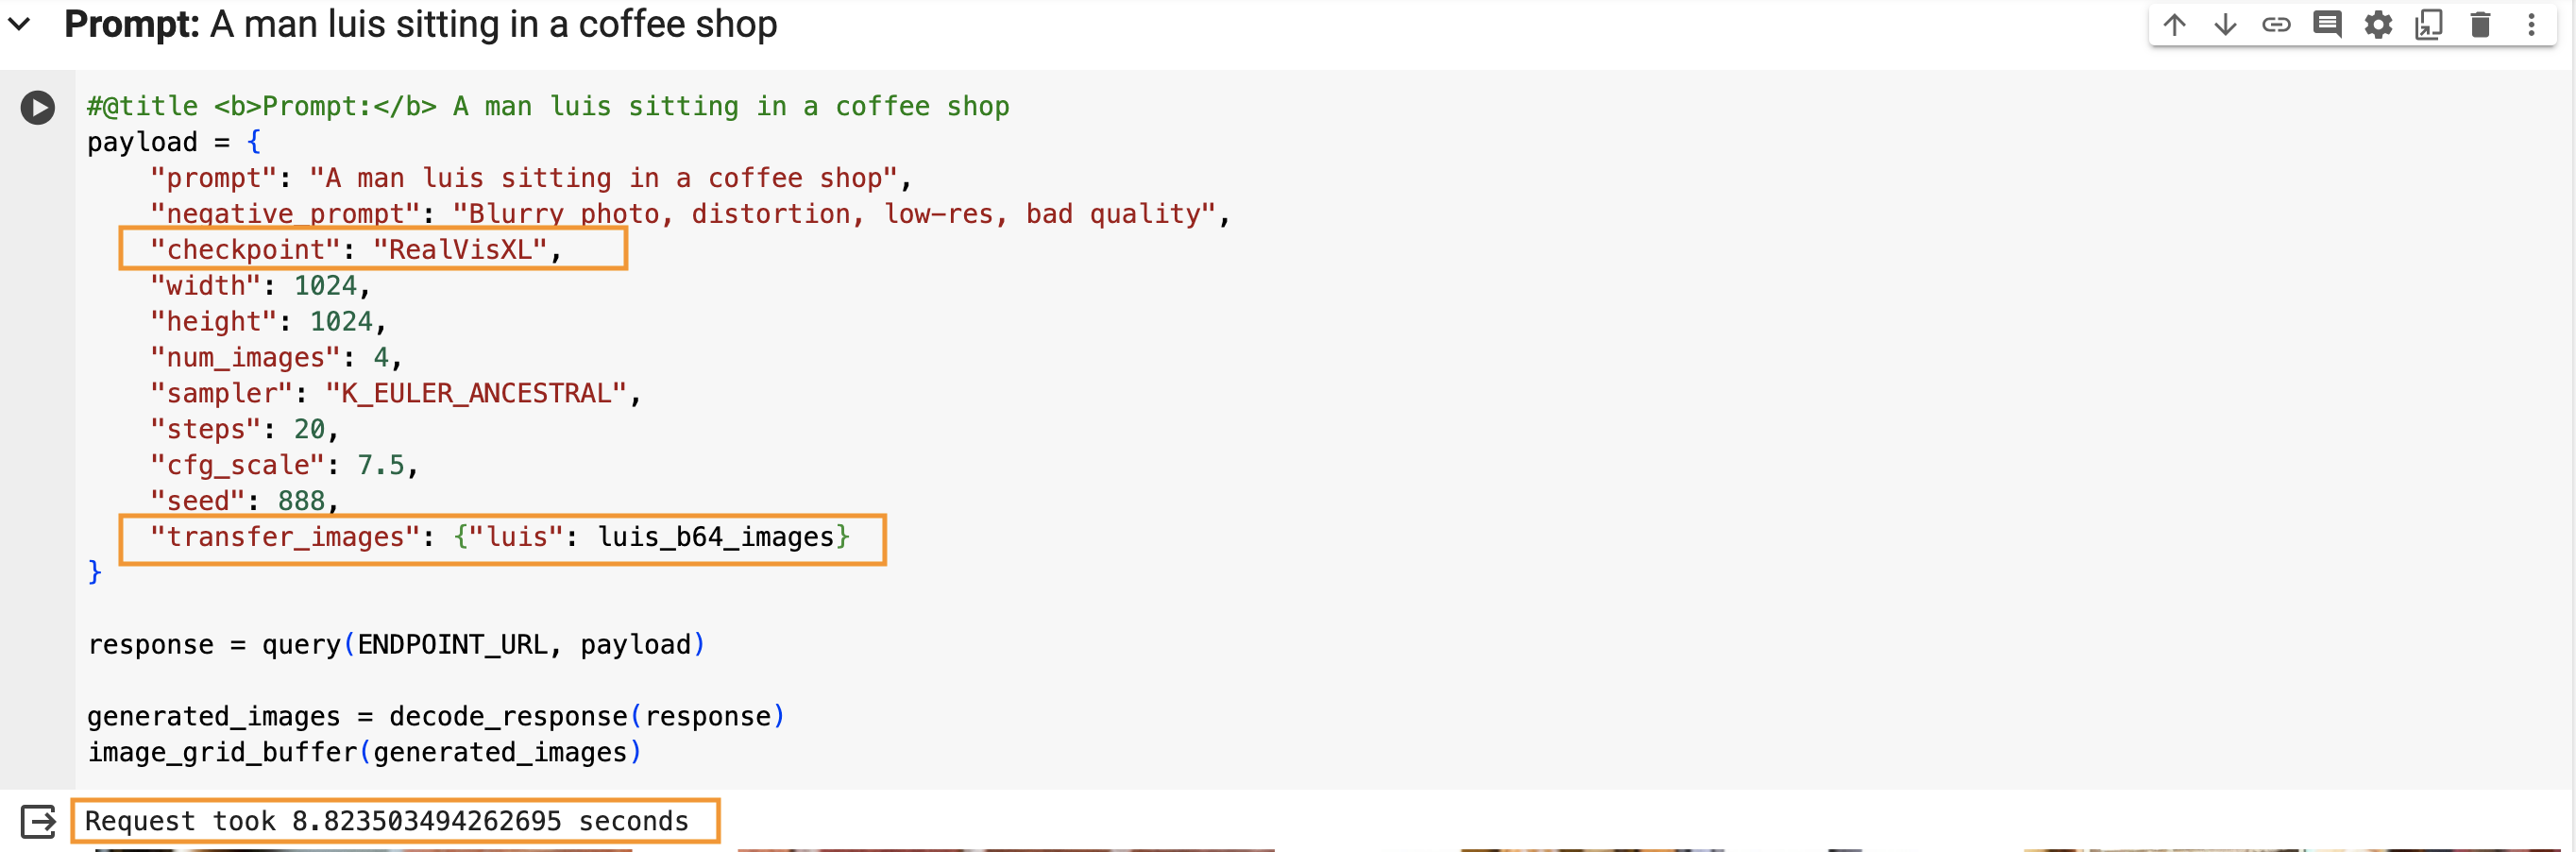 OctoAI code example to call the API showing the fine-tune trigger word in the prompt || '